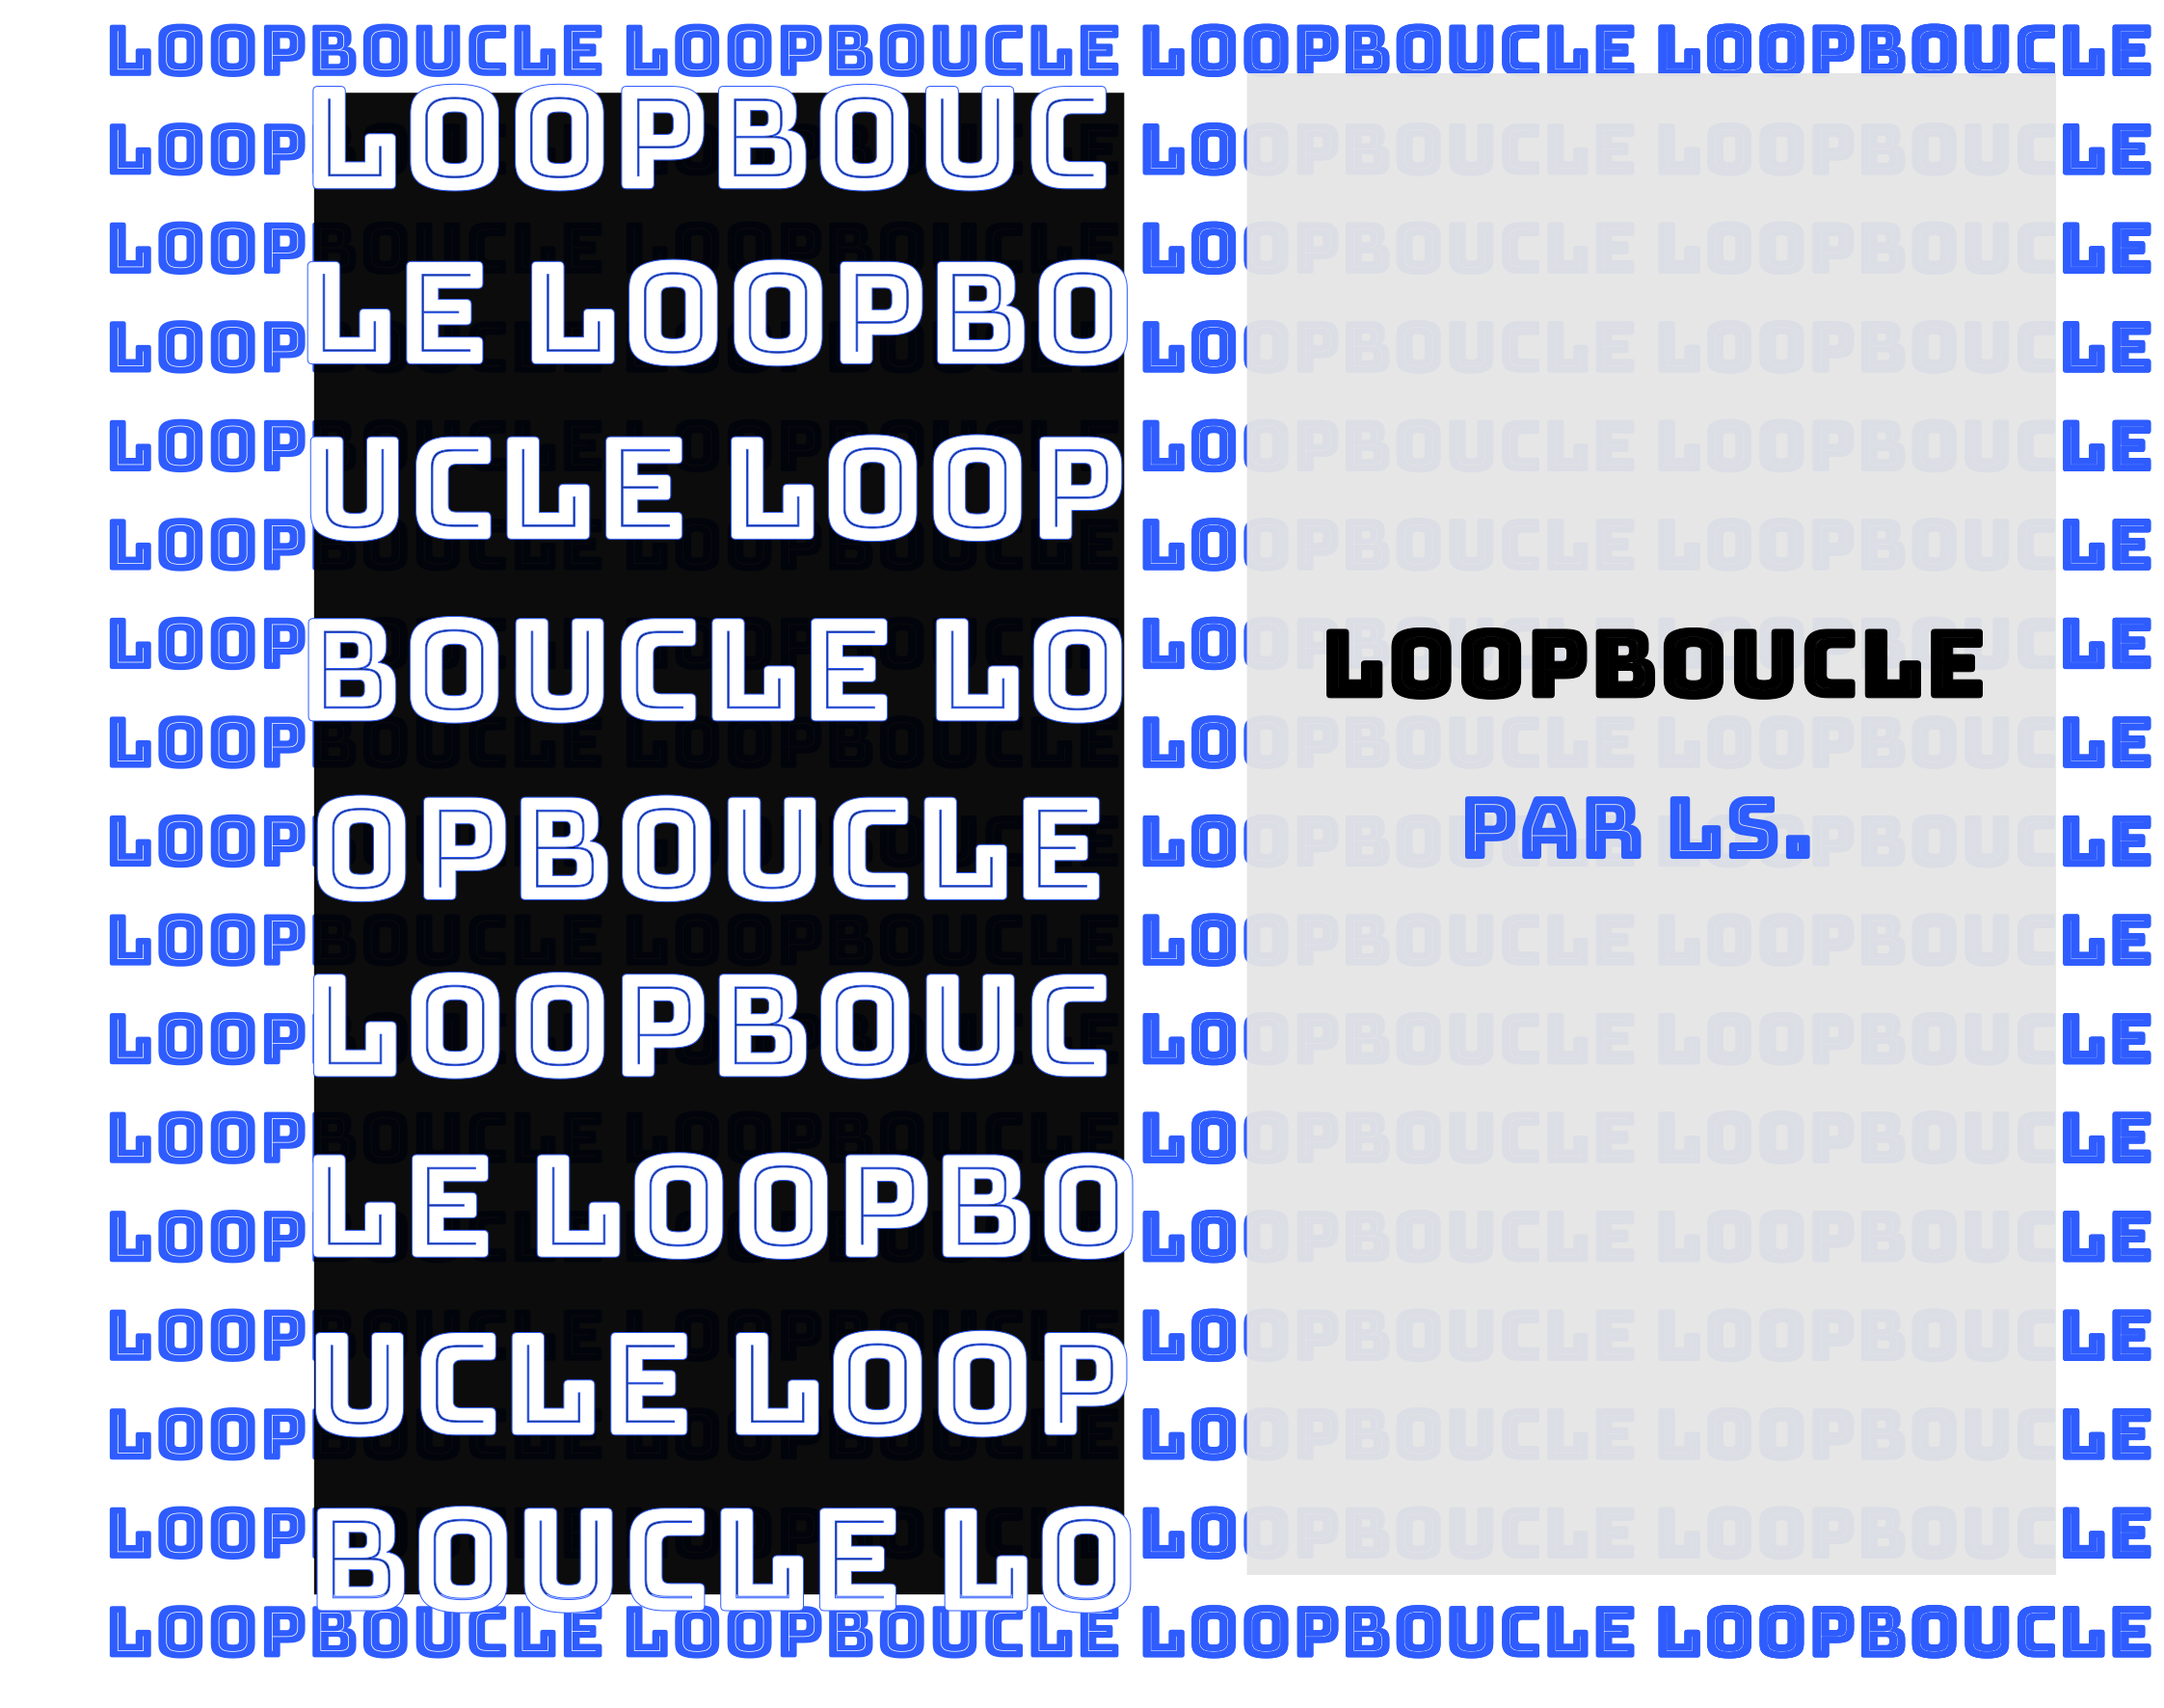 Loopboucle